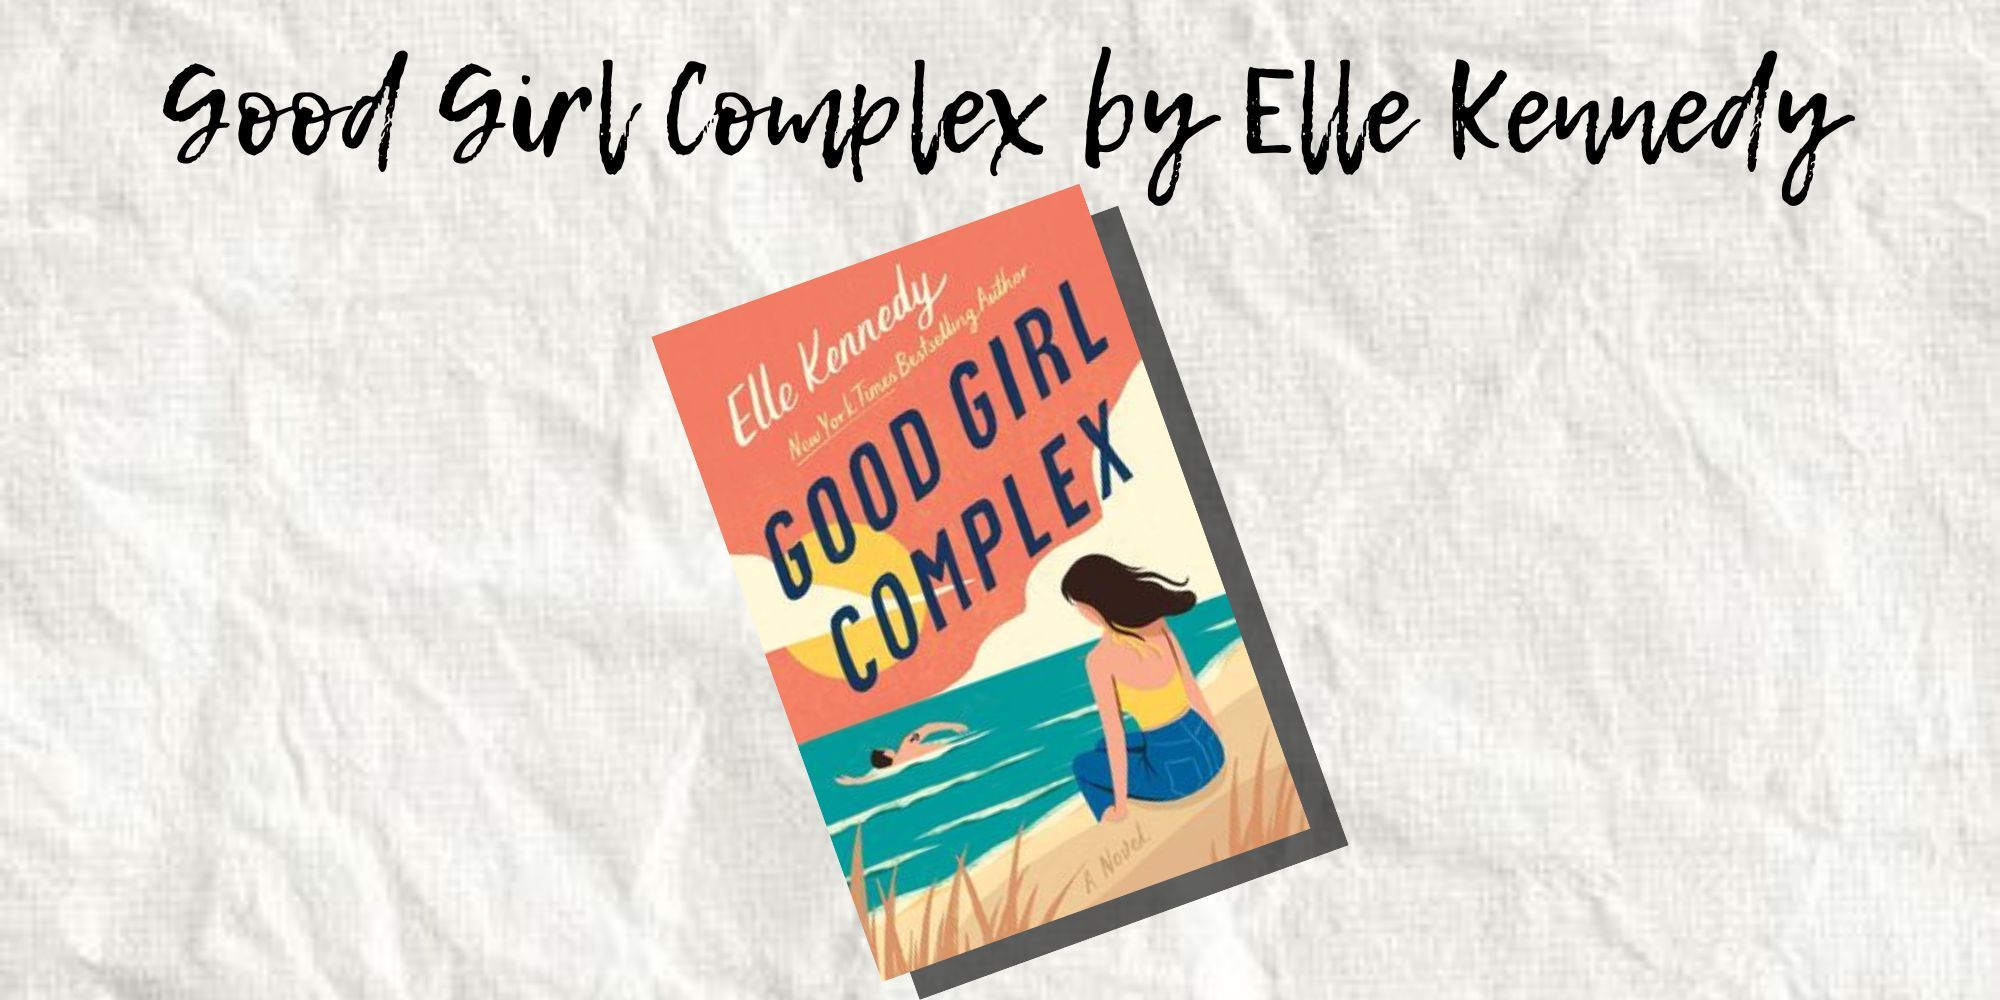 The Cover of Good Girl Complex by Elle Kennedy